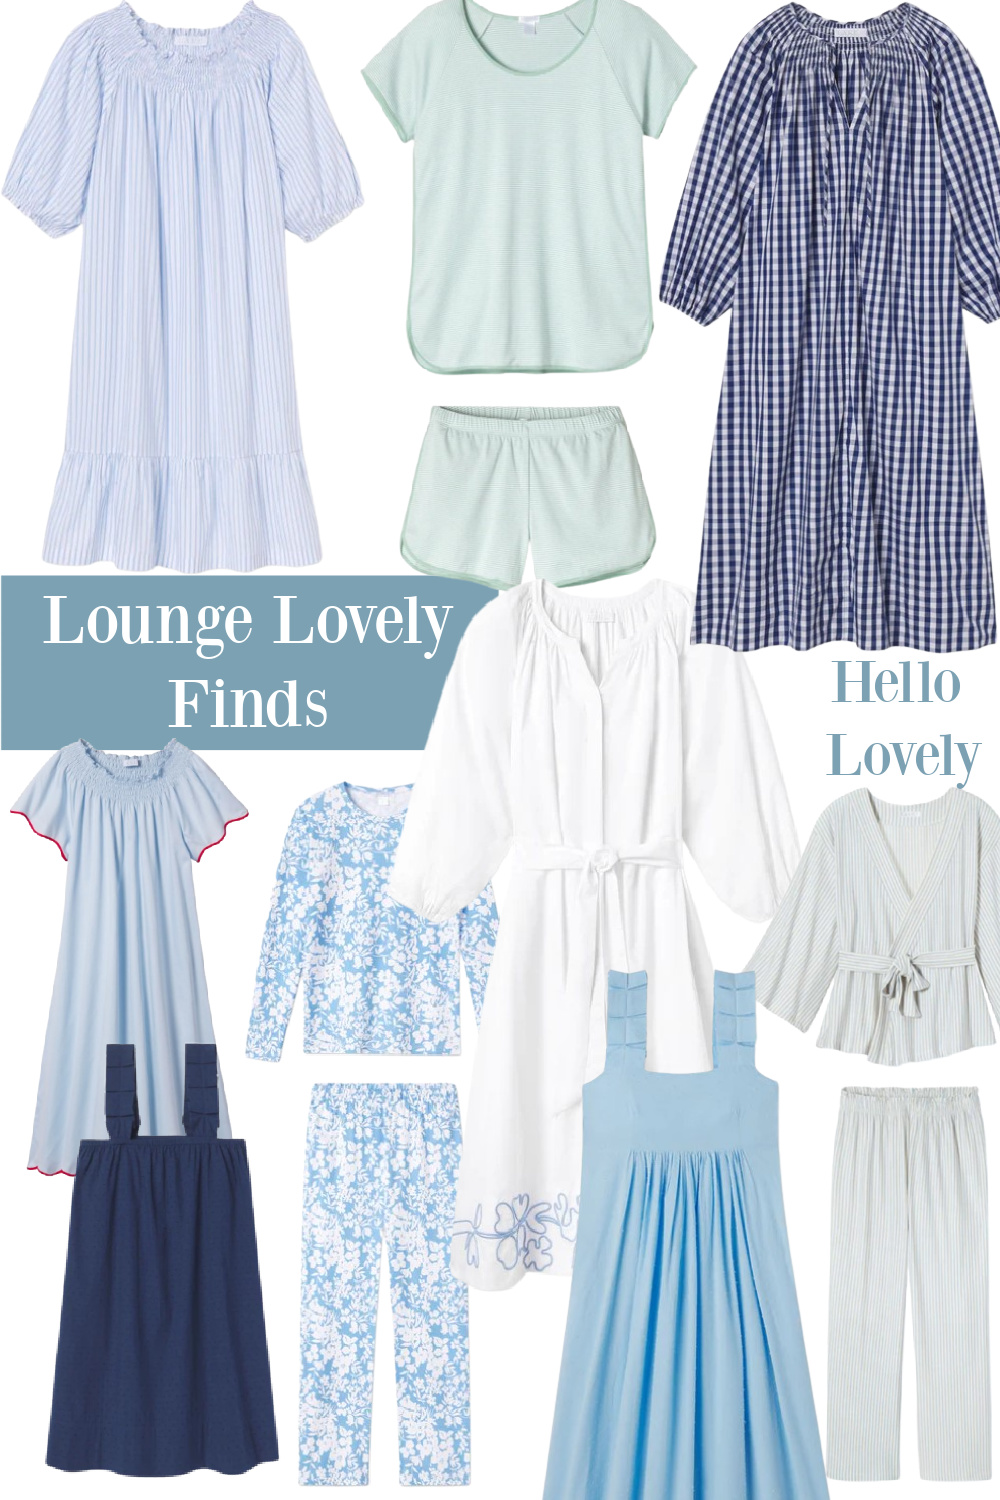 Lounge Lovely Finds on Hello Lovely Studio. #loungewear #loungedresses